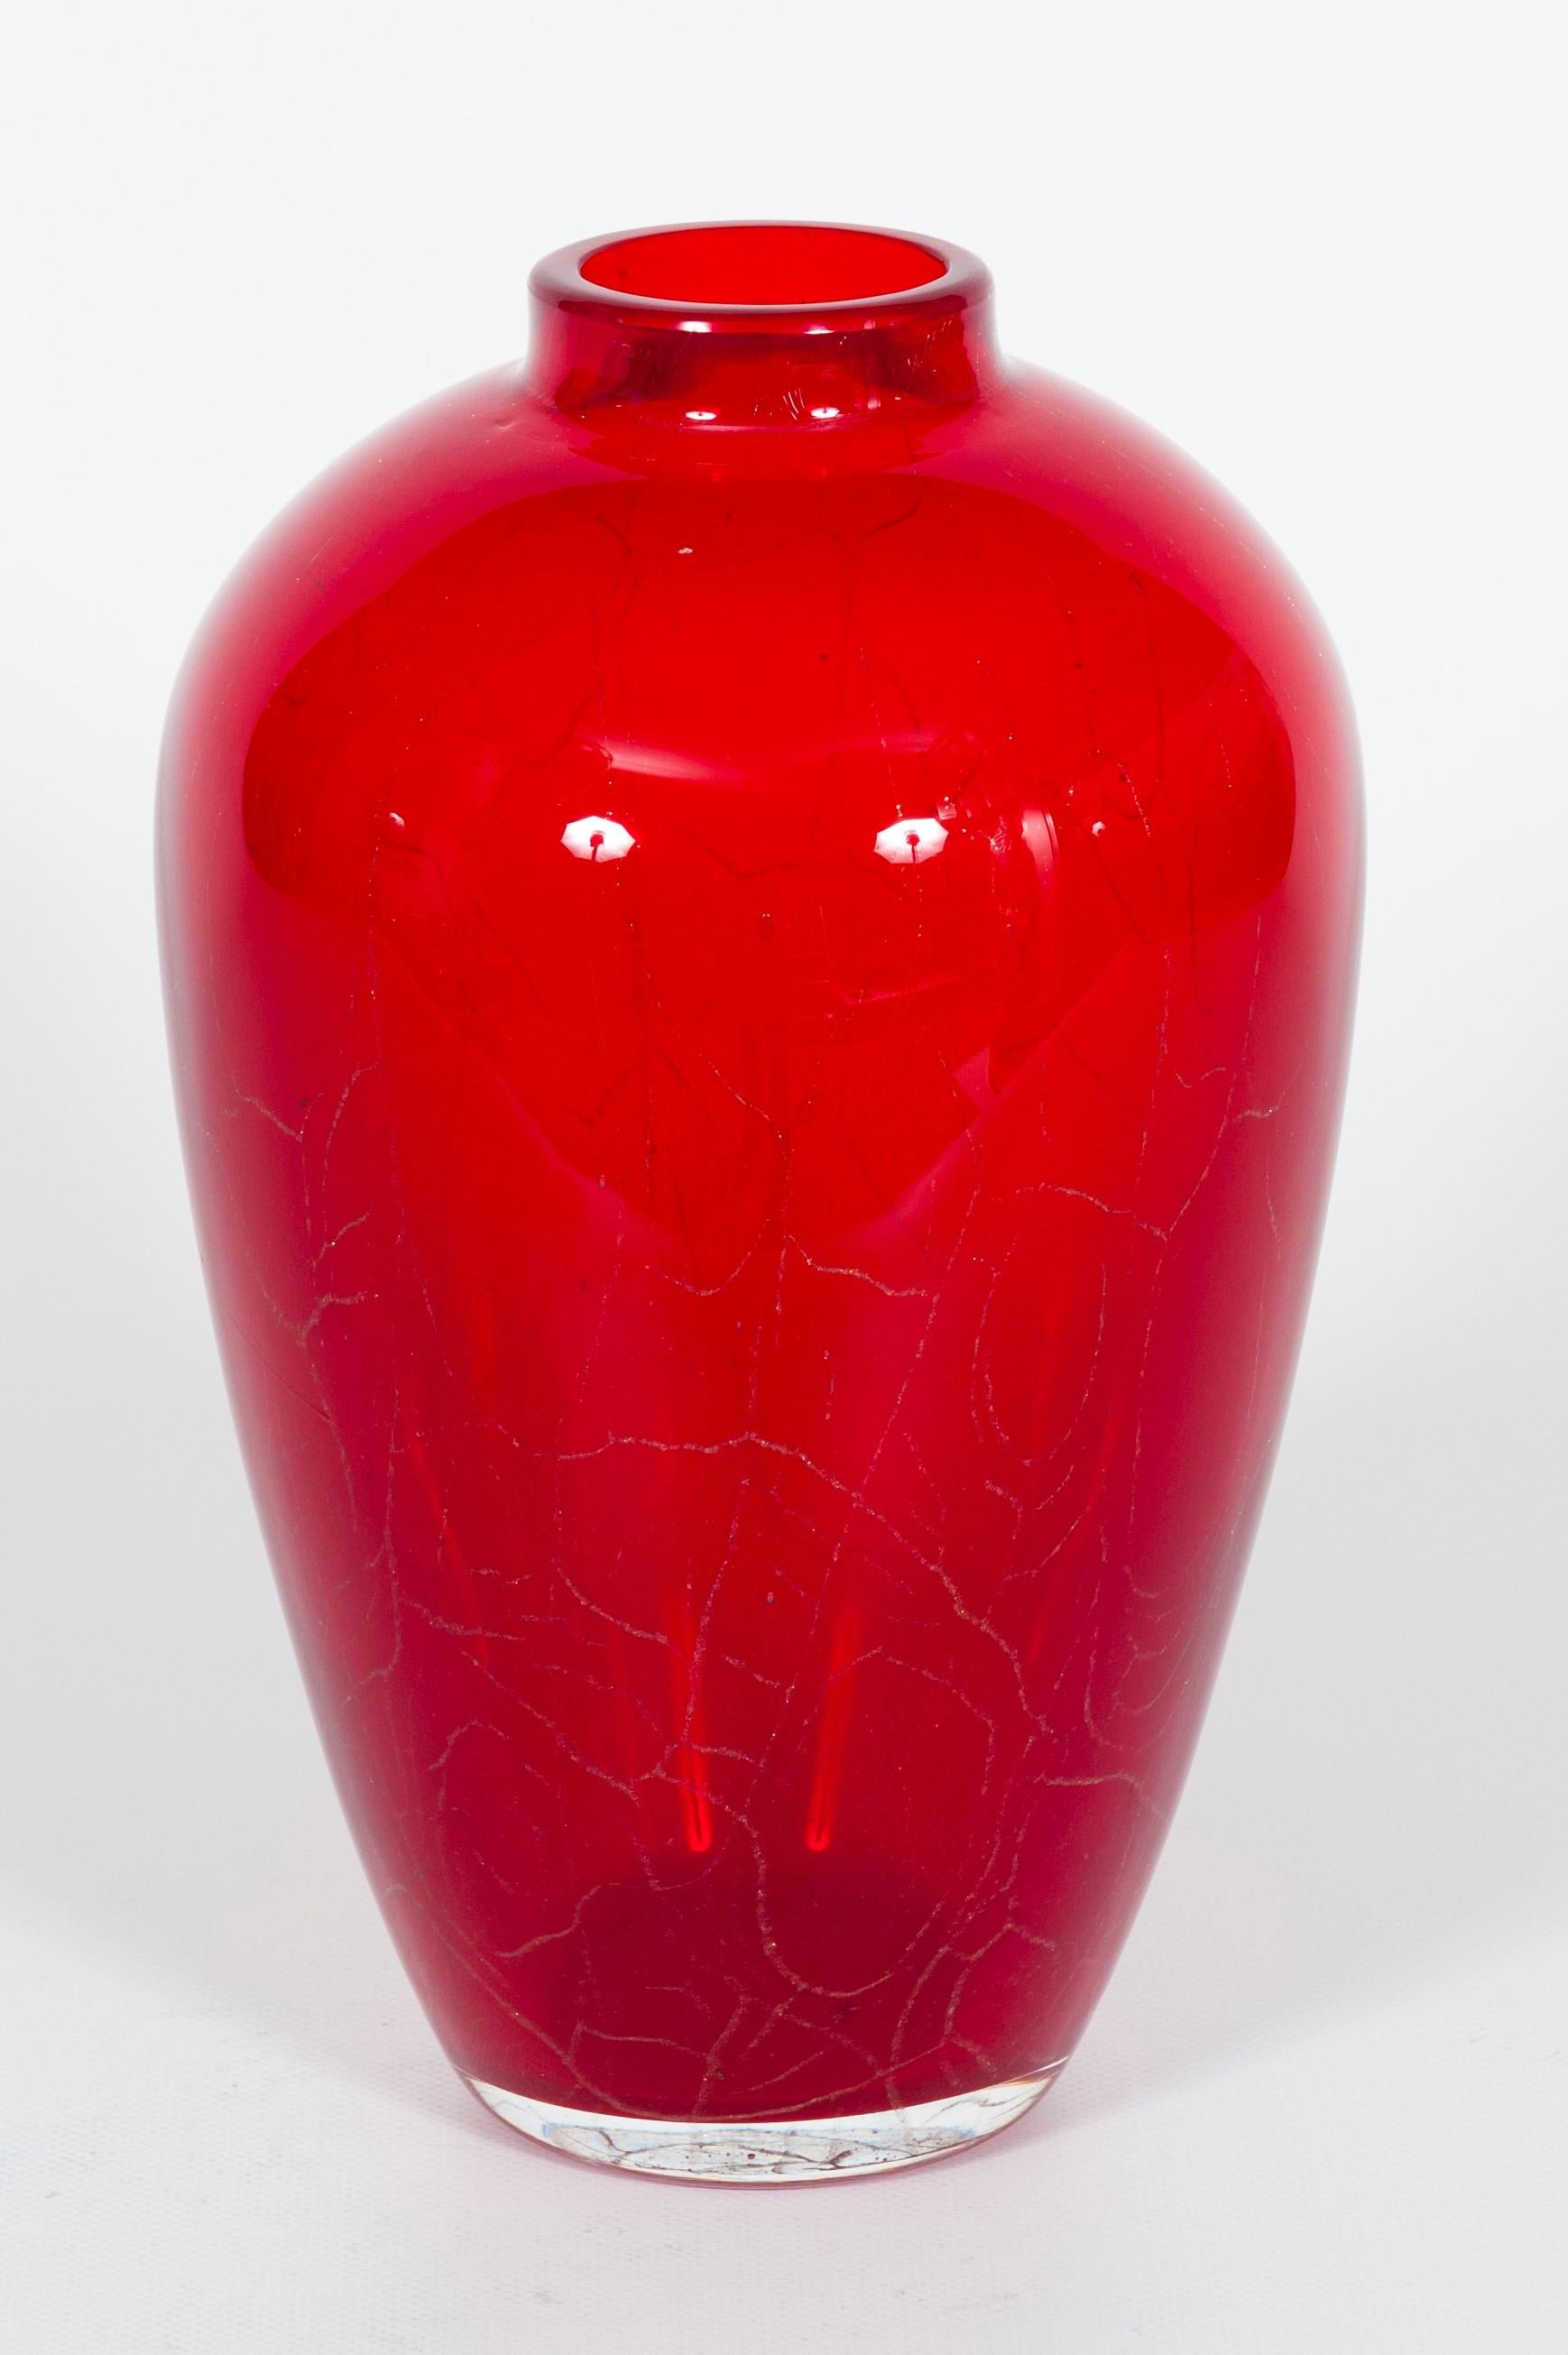 Vintage red murano glass vase with Sommerso gold attributed to Seguso 1950s.
This is an outstanding Italian design vase, characterized by a harmonious and delicate shape, an intense ruby red color, and submerged stripes of 24-carat gold. It is